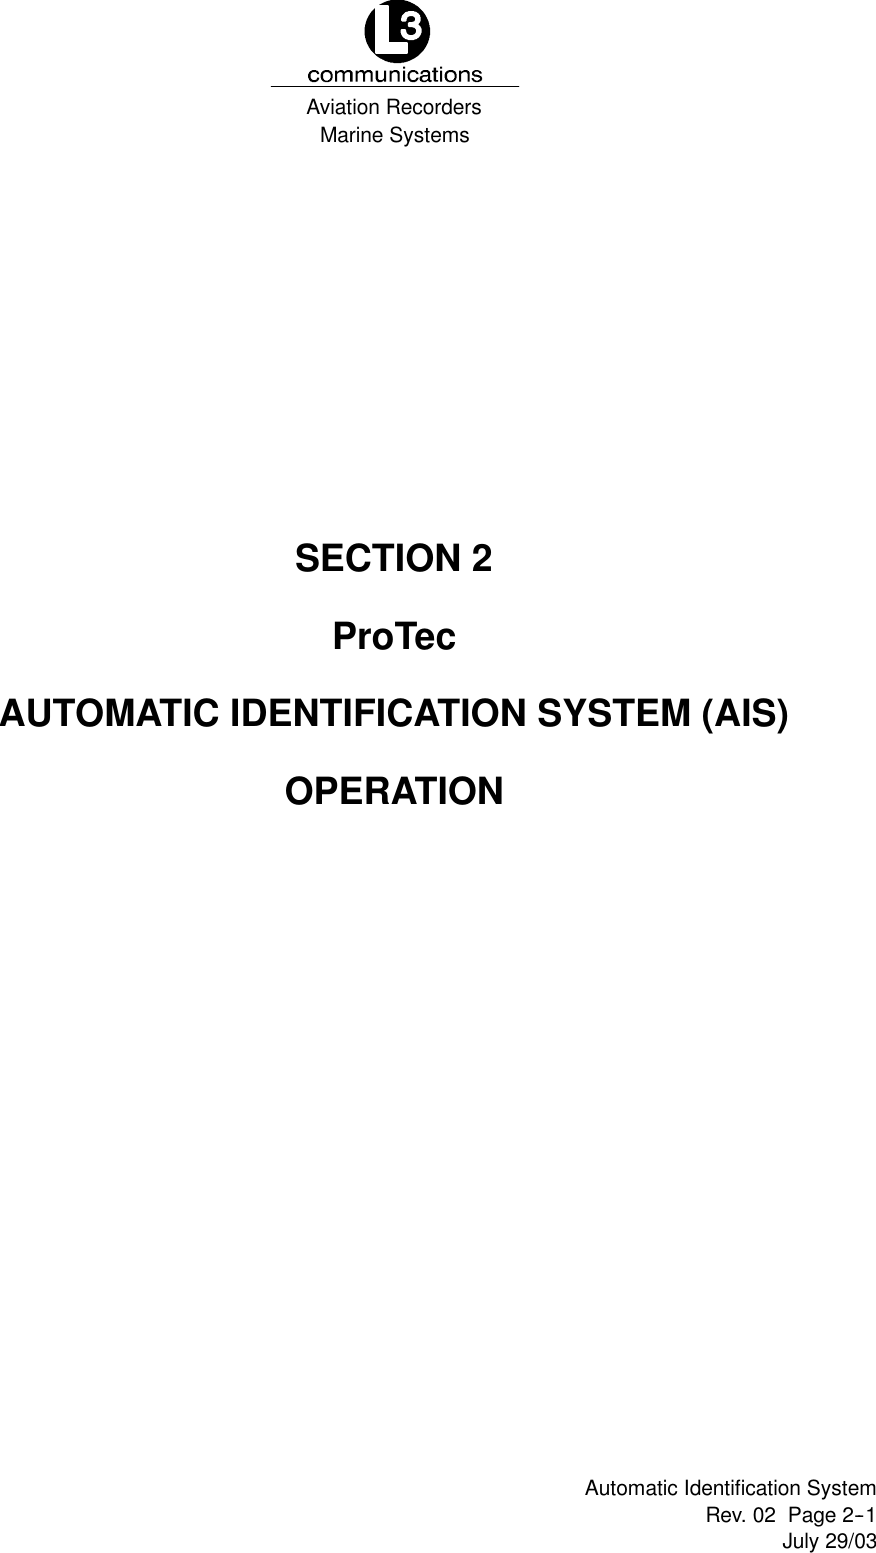 Marine SystemsAviation RecordersRev. 02 Page 2--1July 29/03Automatic Identification SystemSECTION 2ProTecAUTOMATIC IDENTIFICATION SYSTEM (AIS)OPERATION